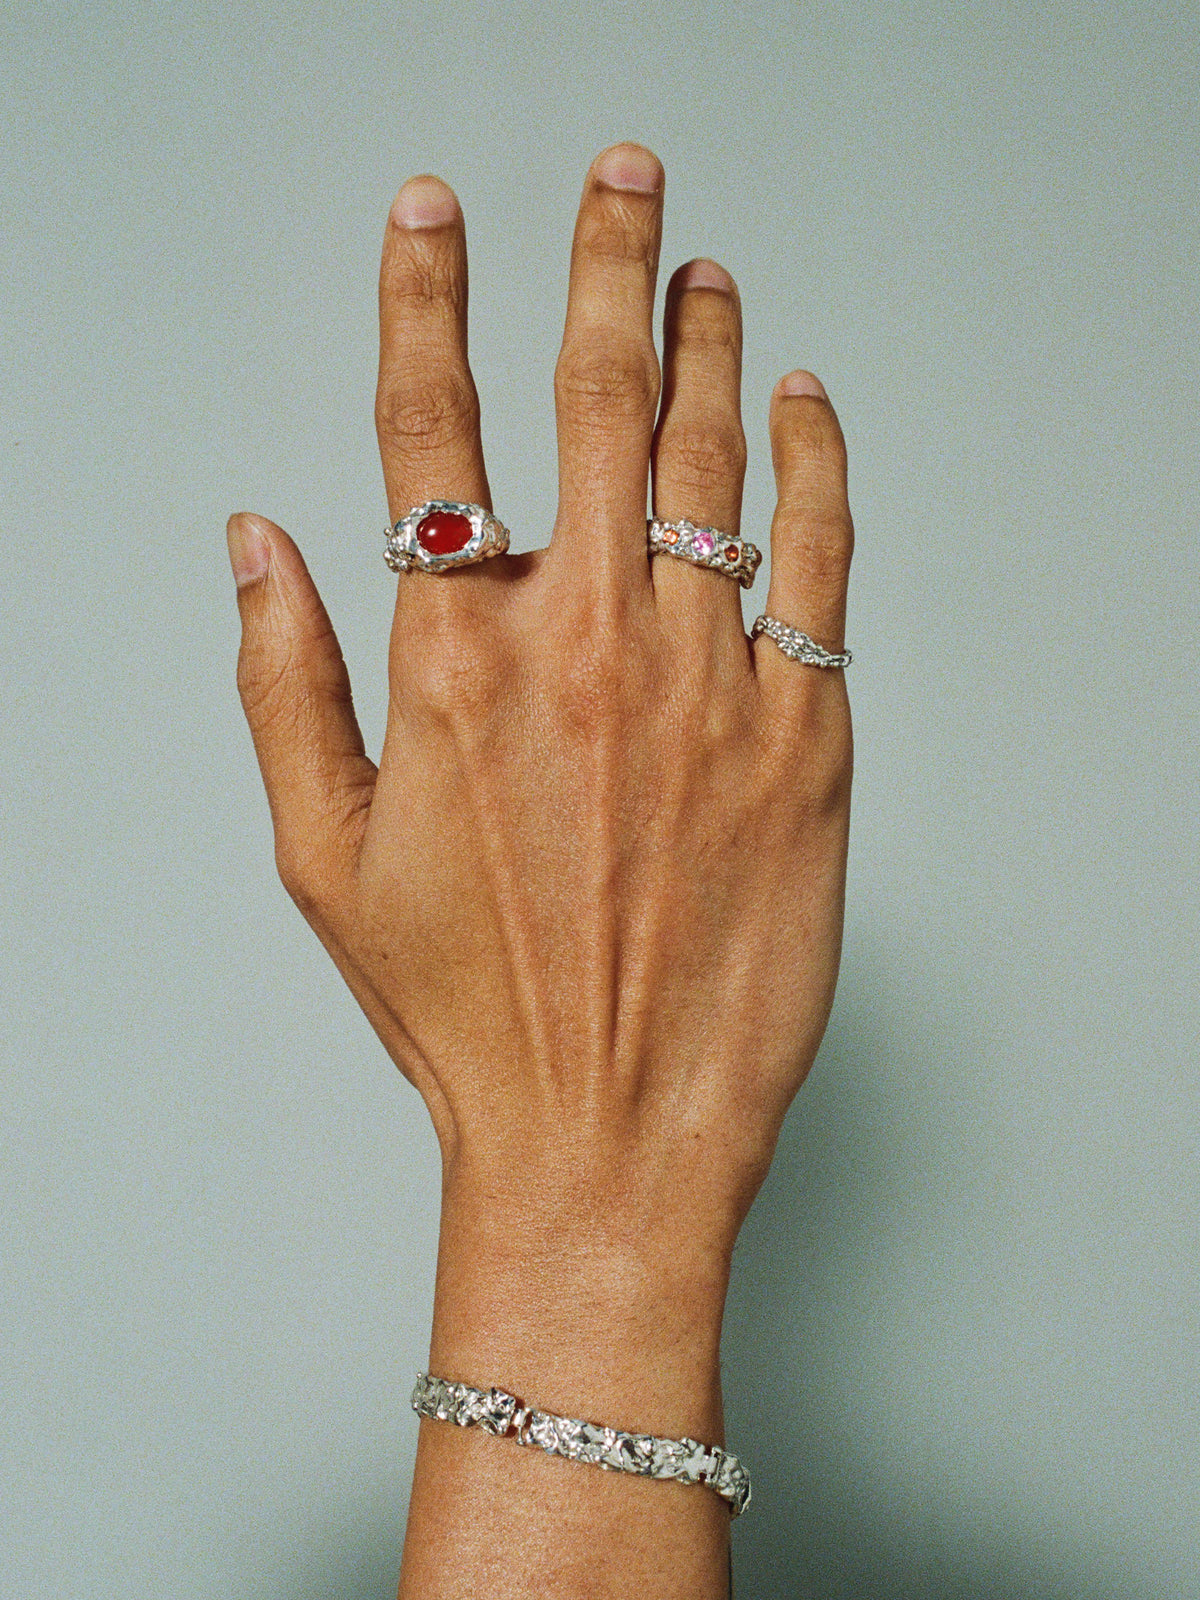 FARIS ROCA WAVE Ring in sterling silver worn on model. Styled with ROCA EYE Ring in silver with carnelian, ROCA GEM Band in sterling silver with lab-created pink and orange sapphire, and BRUTO Bracelet.